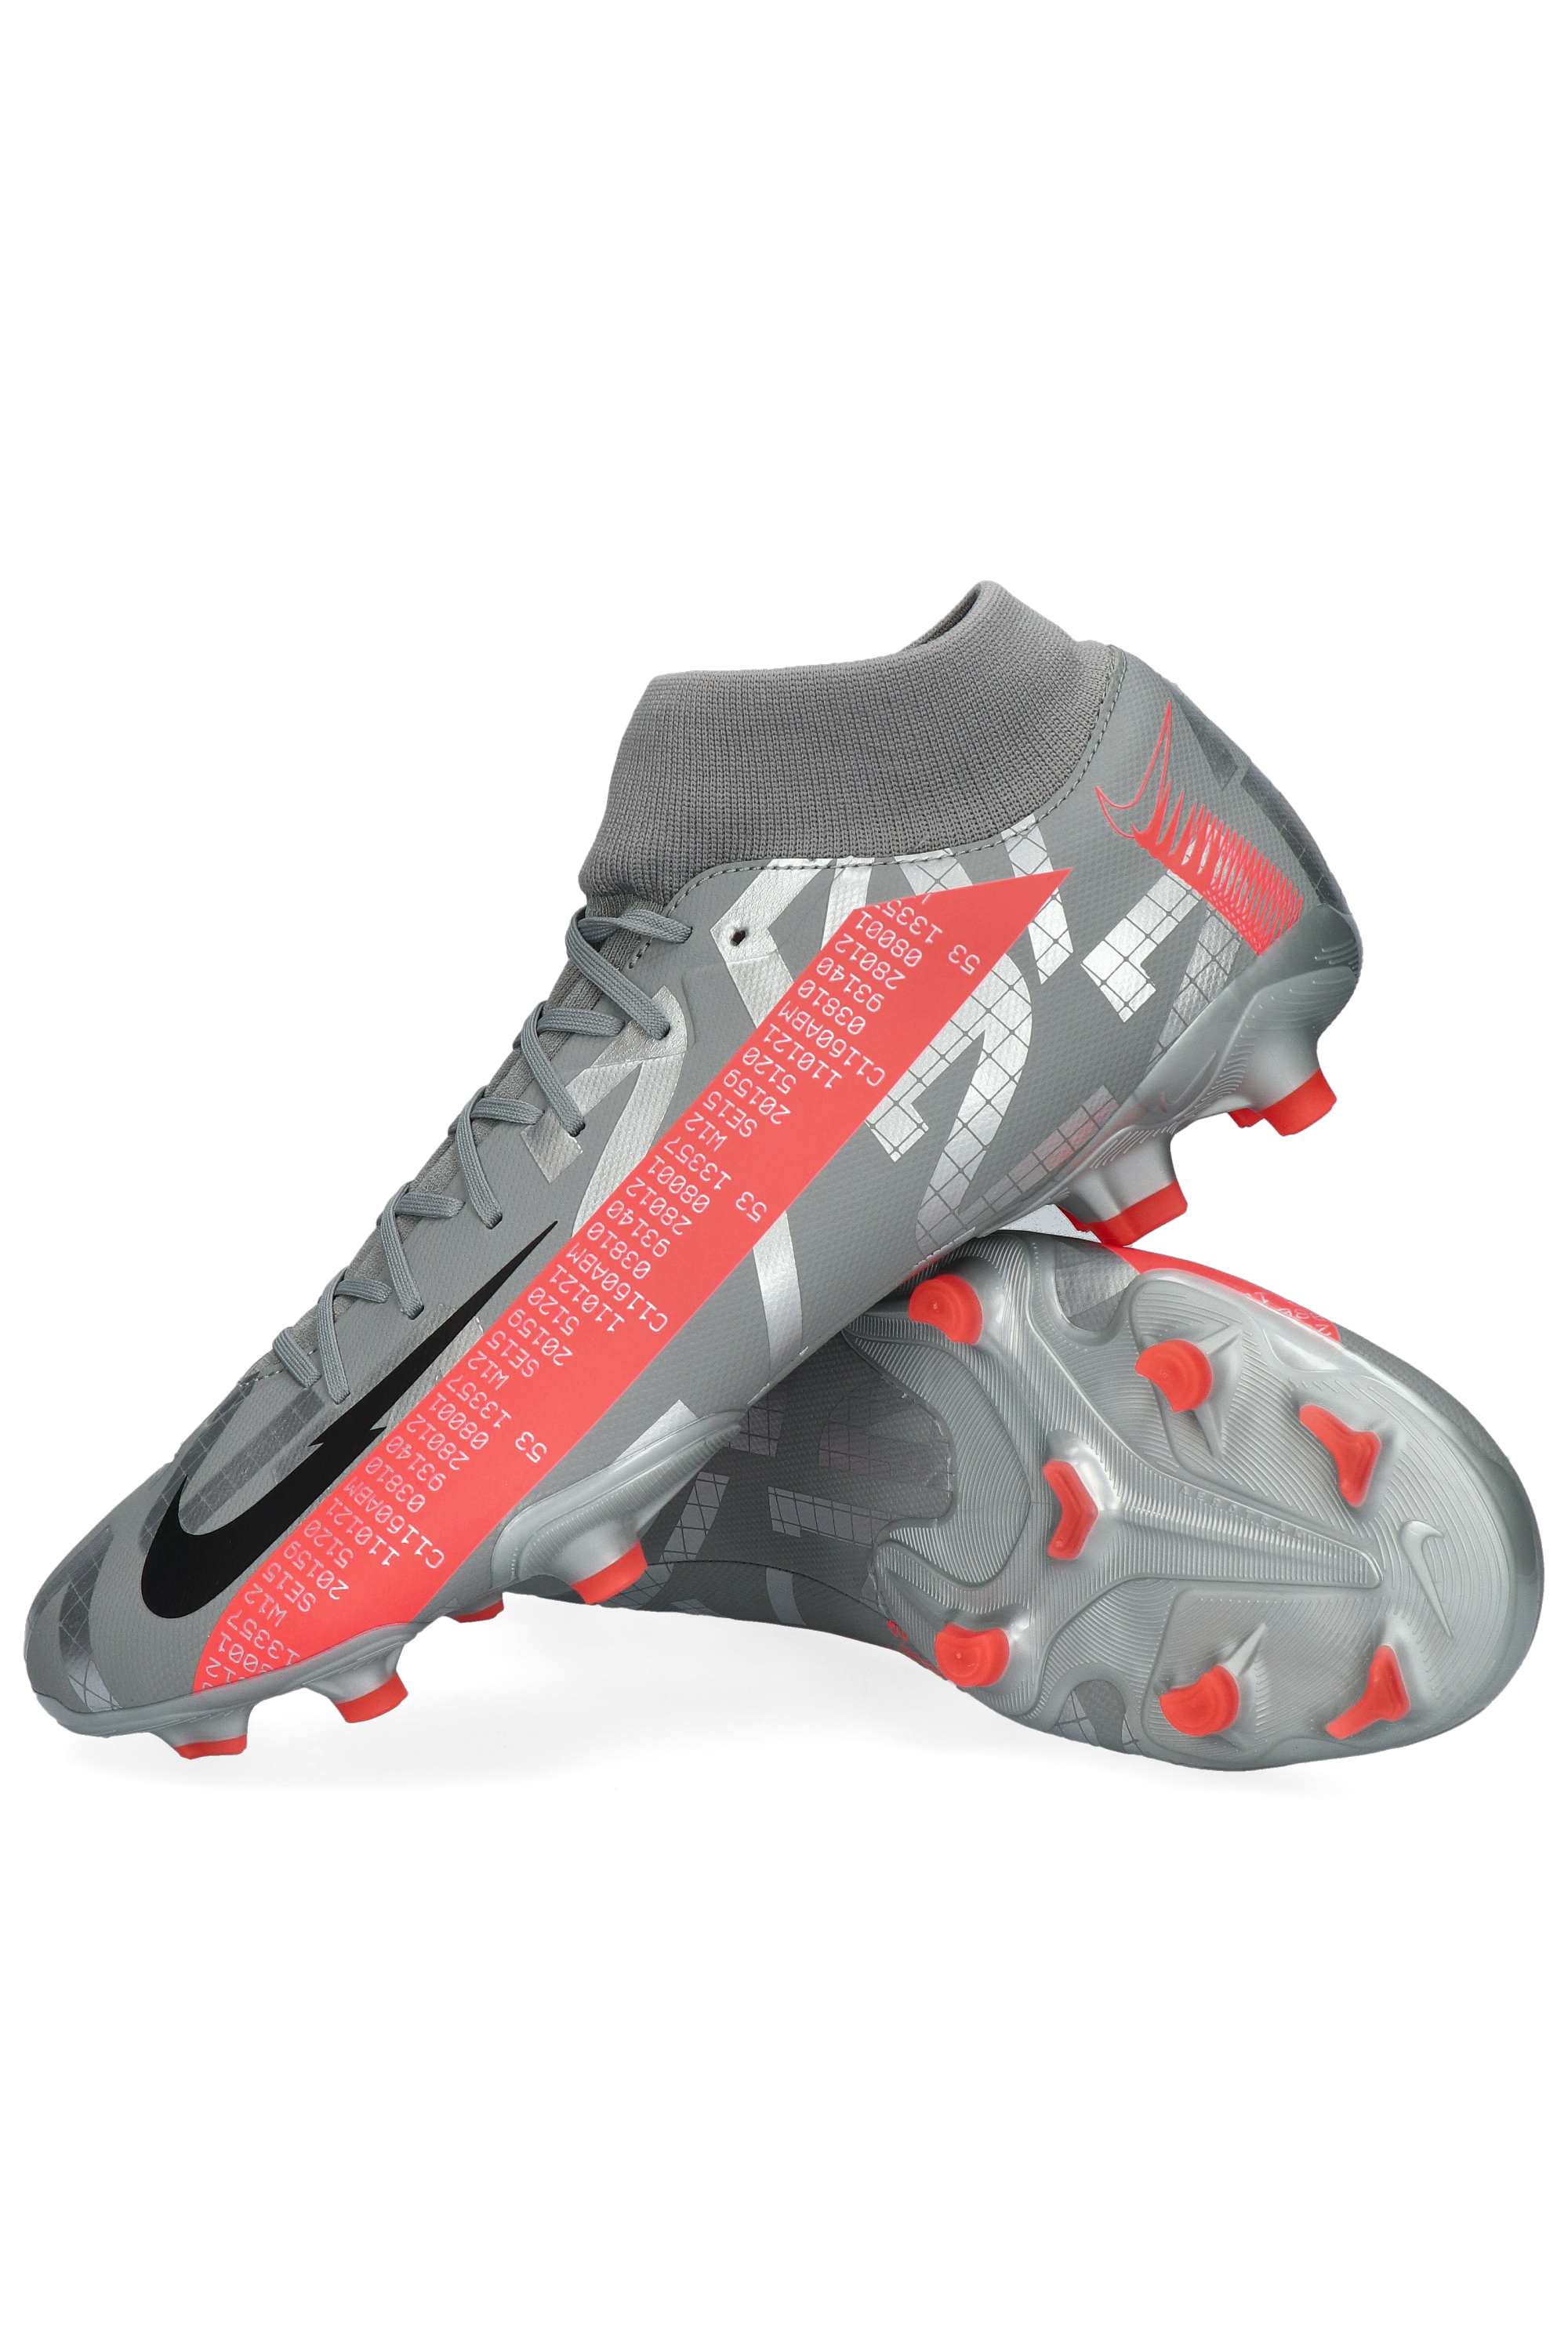 NIKE Mercurial Superfly 6 Academy MG Men 's Football Shoes.